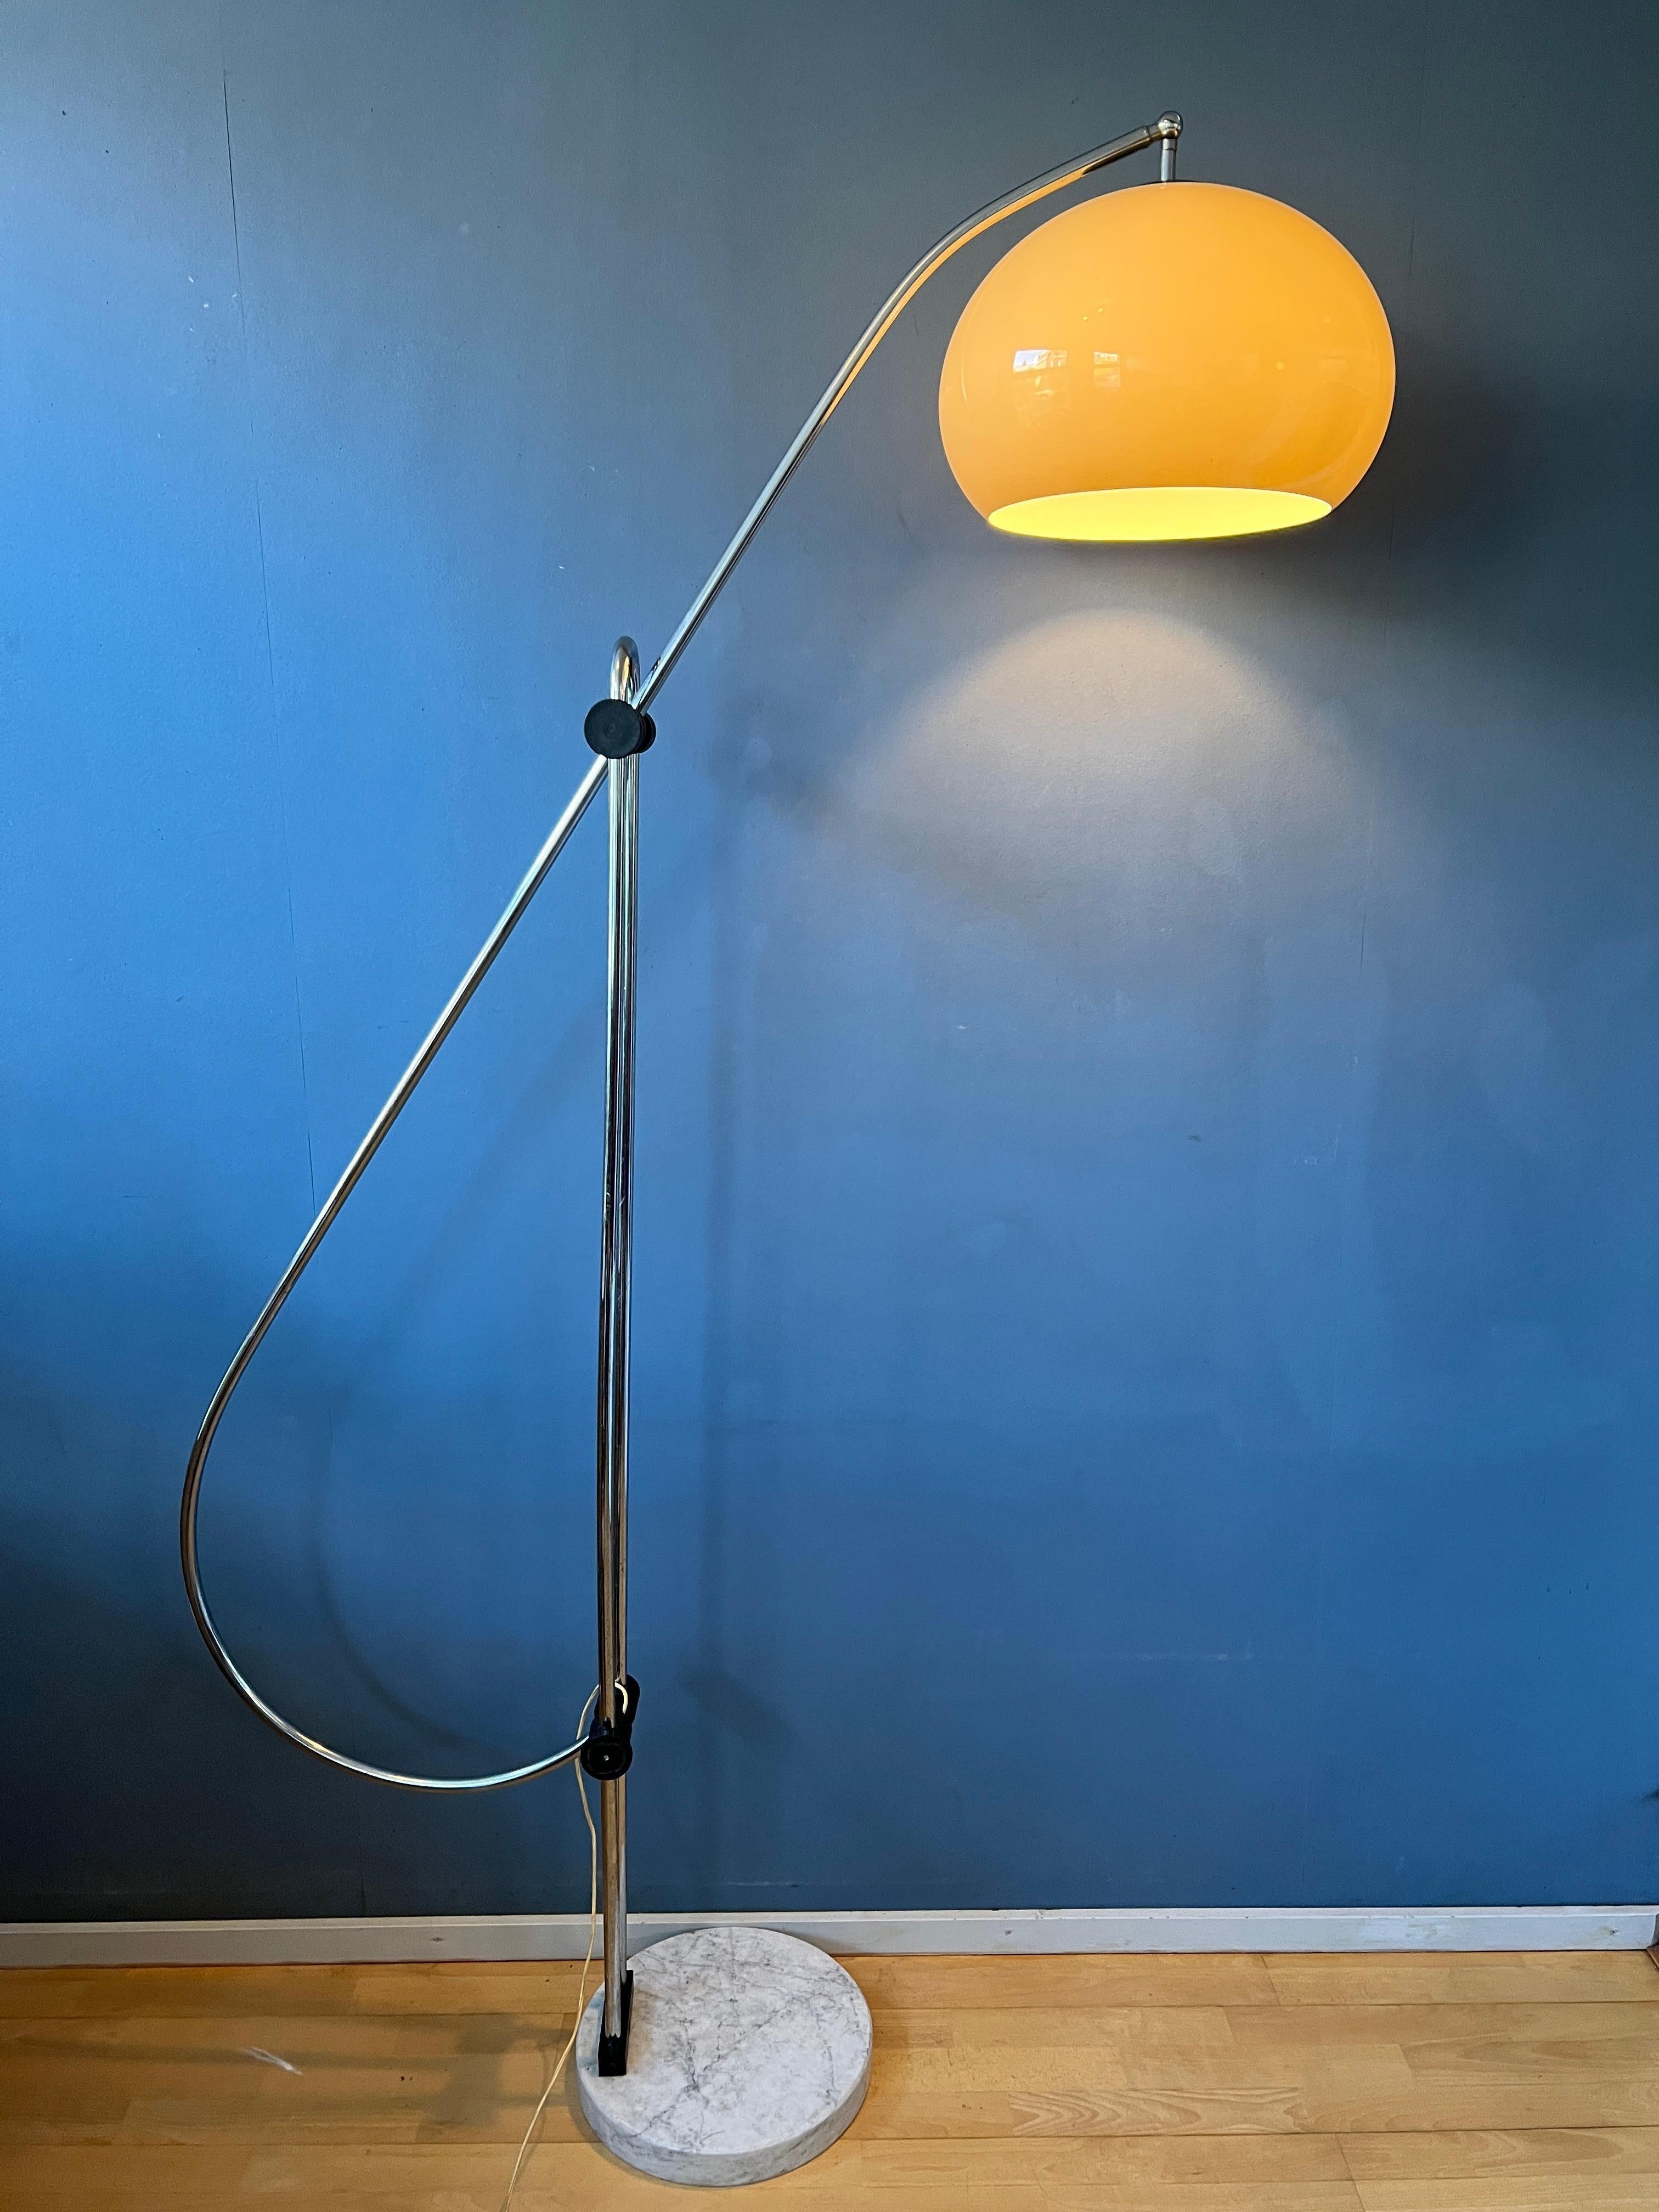 A space age floor lamp in the style of Guzzini / Goffredo Reggiani with an amazingly extendable 'rod' arm and acrylic glass 'mushroom' shade. The black mechanisms attached to the chrome frame allow you to extend the arm up to 210 cm in height and